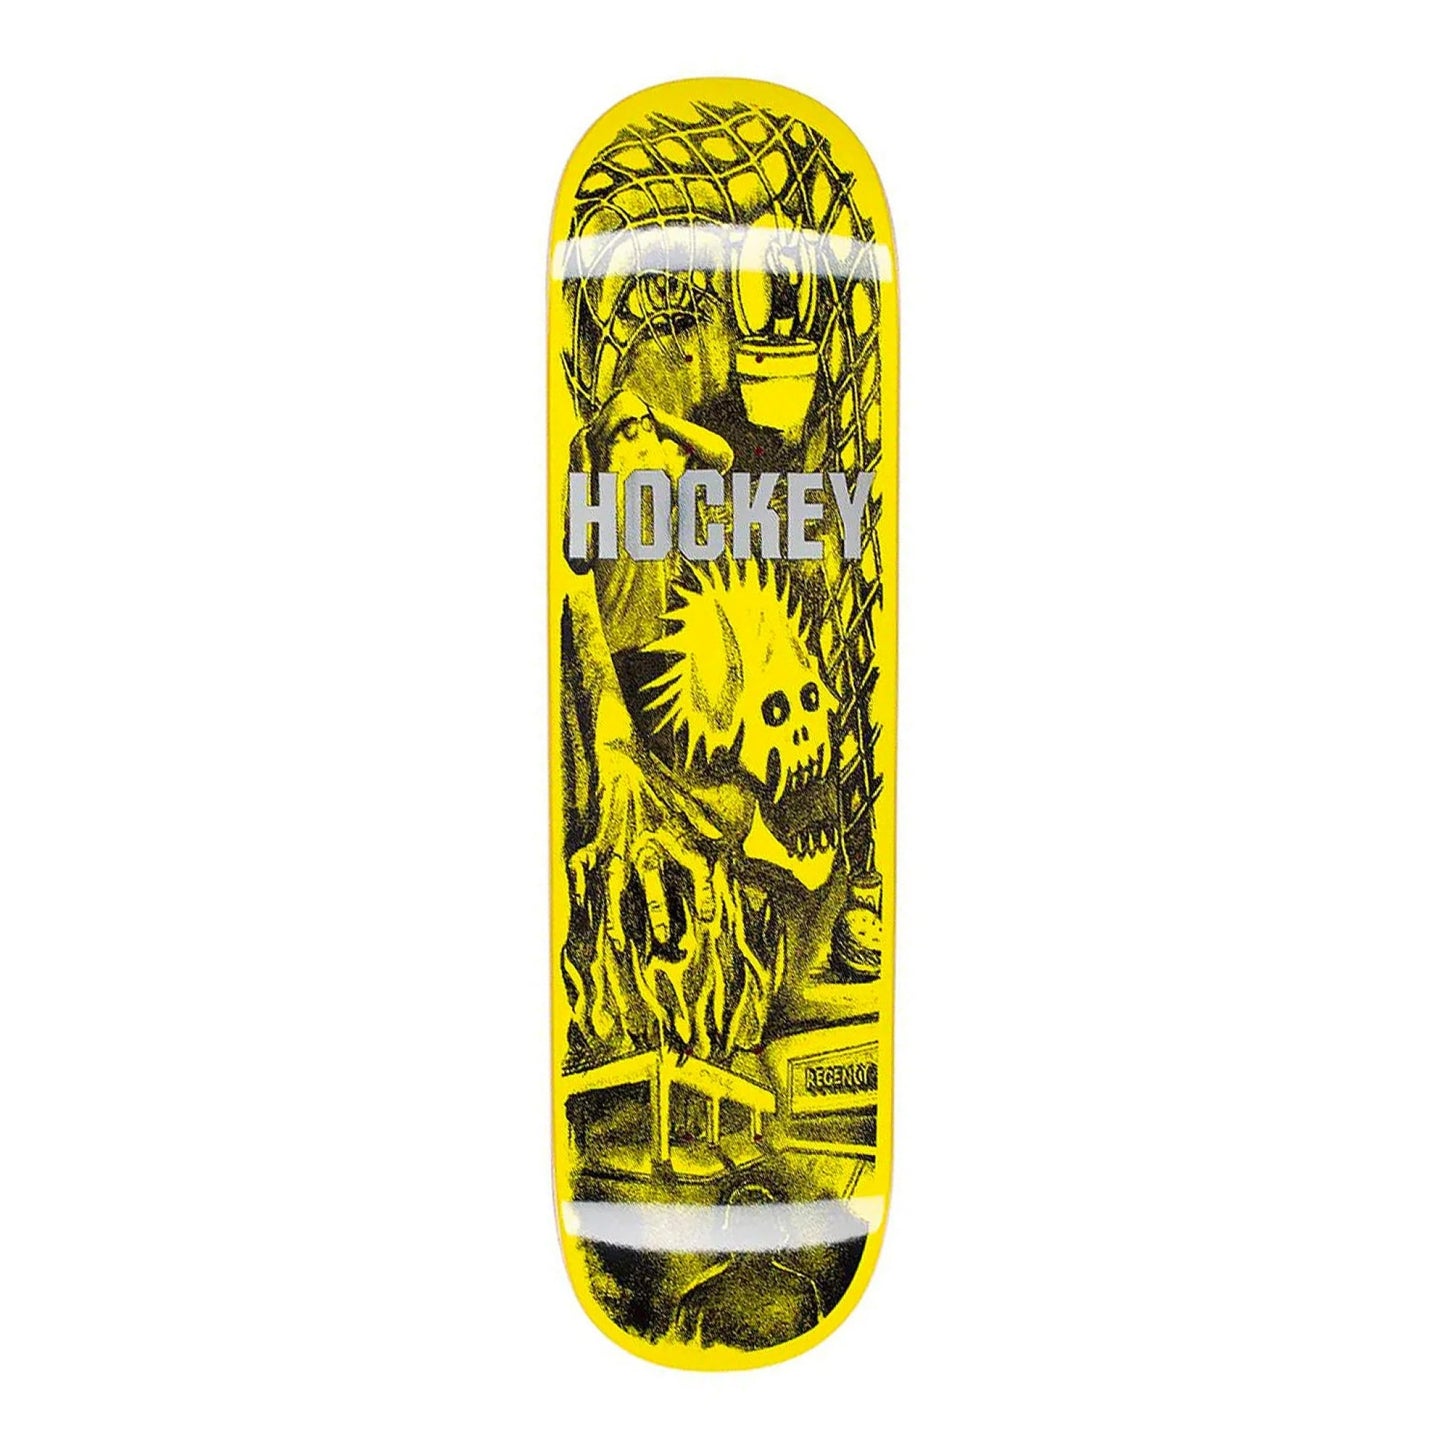 Hockey Skateboards - 8.38" - Diego Todd Mere Mortal Deck - Yellow - Prime Delux Store